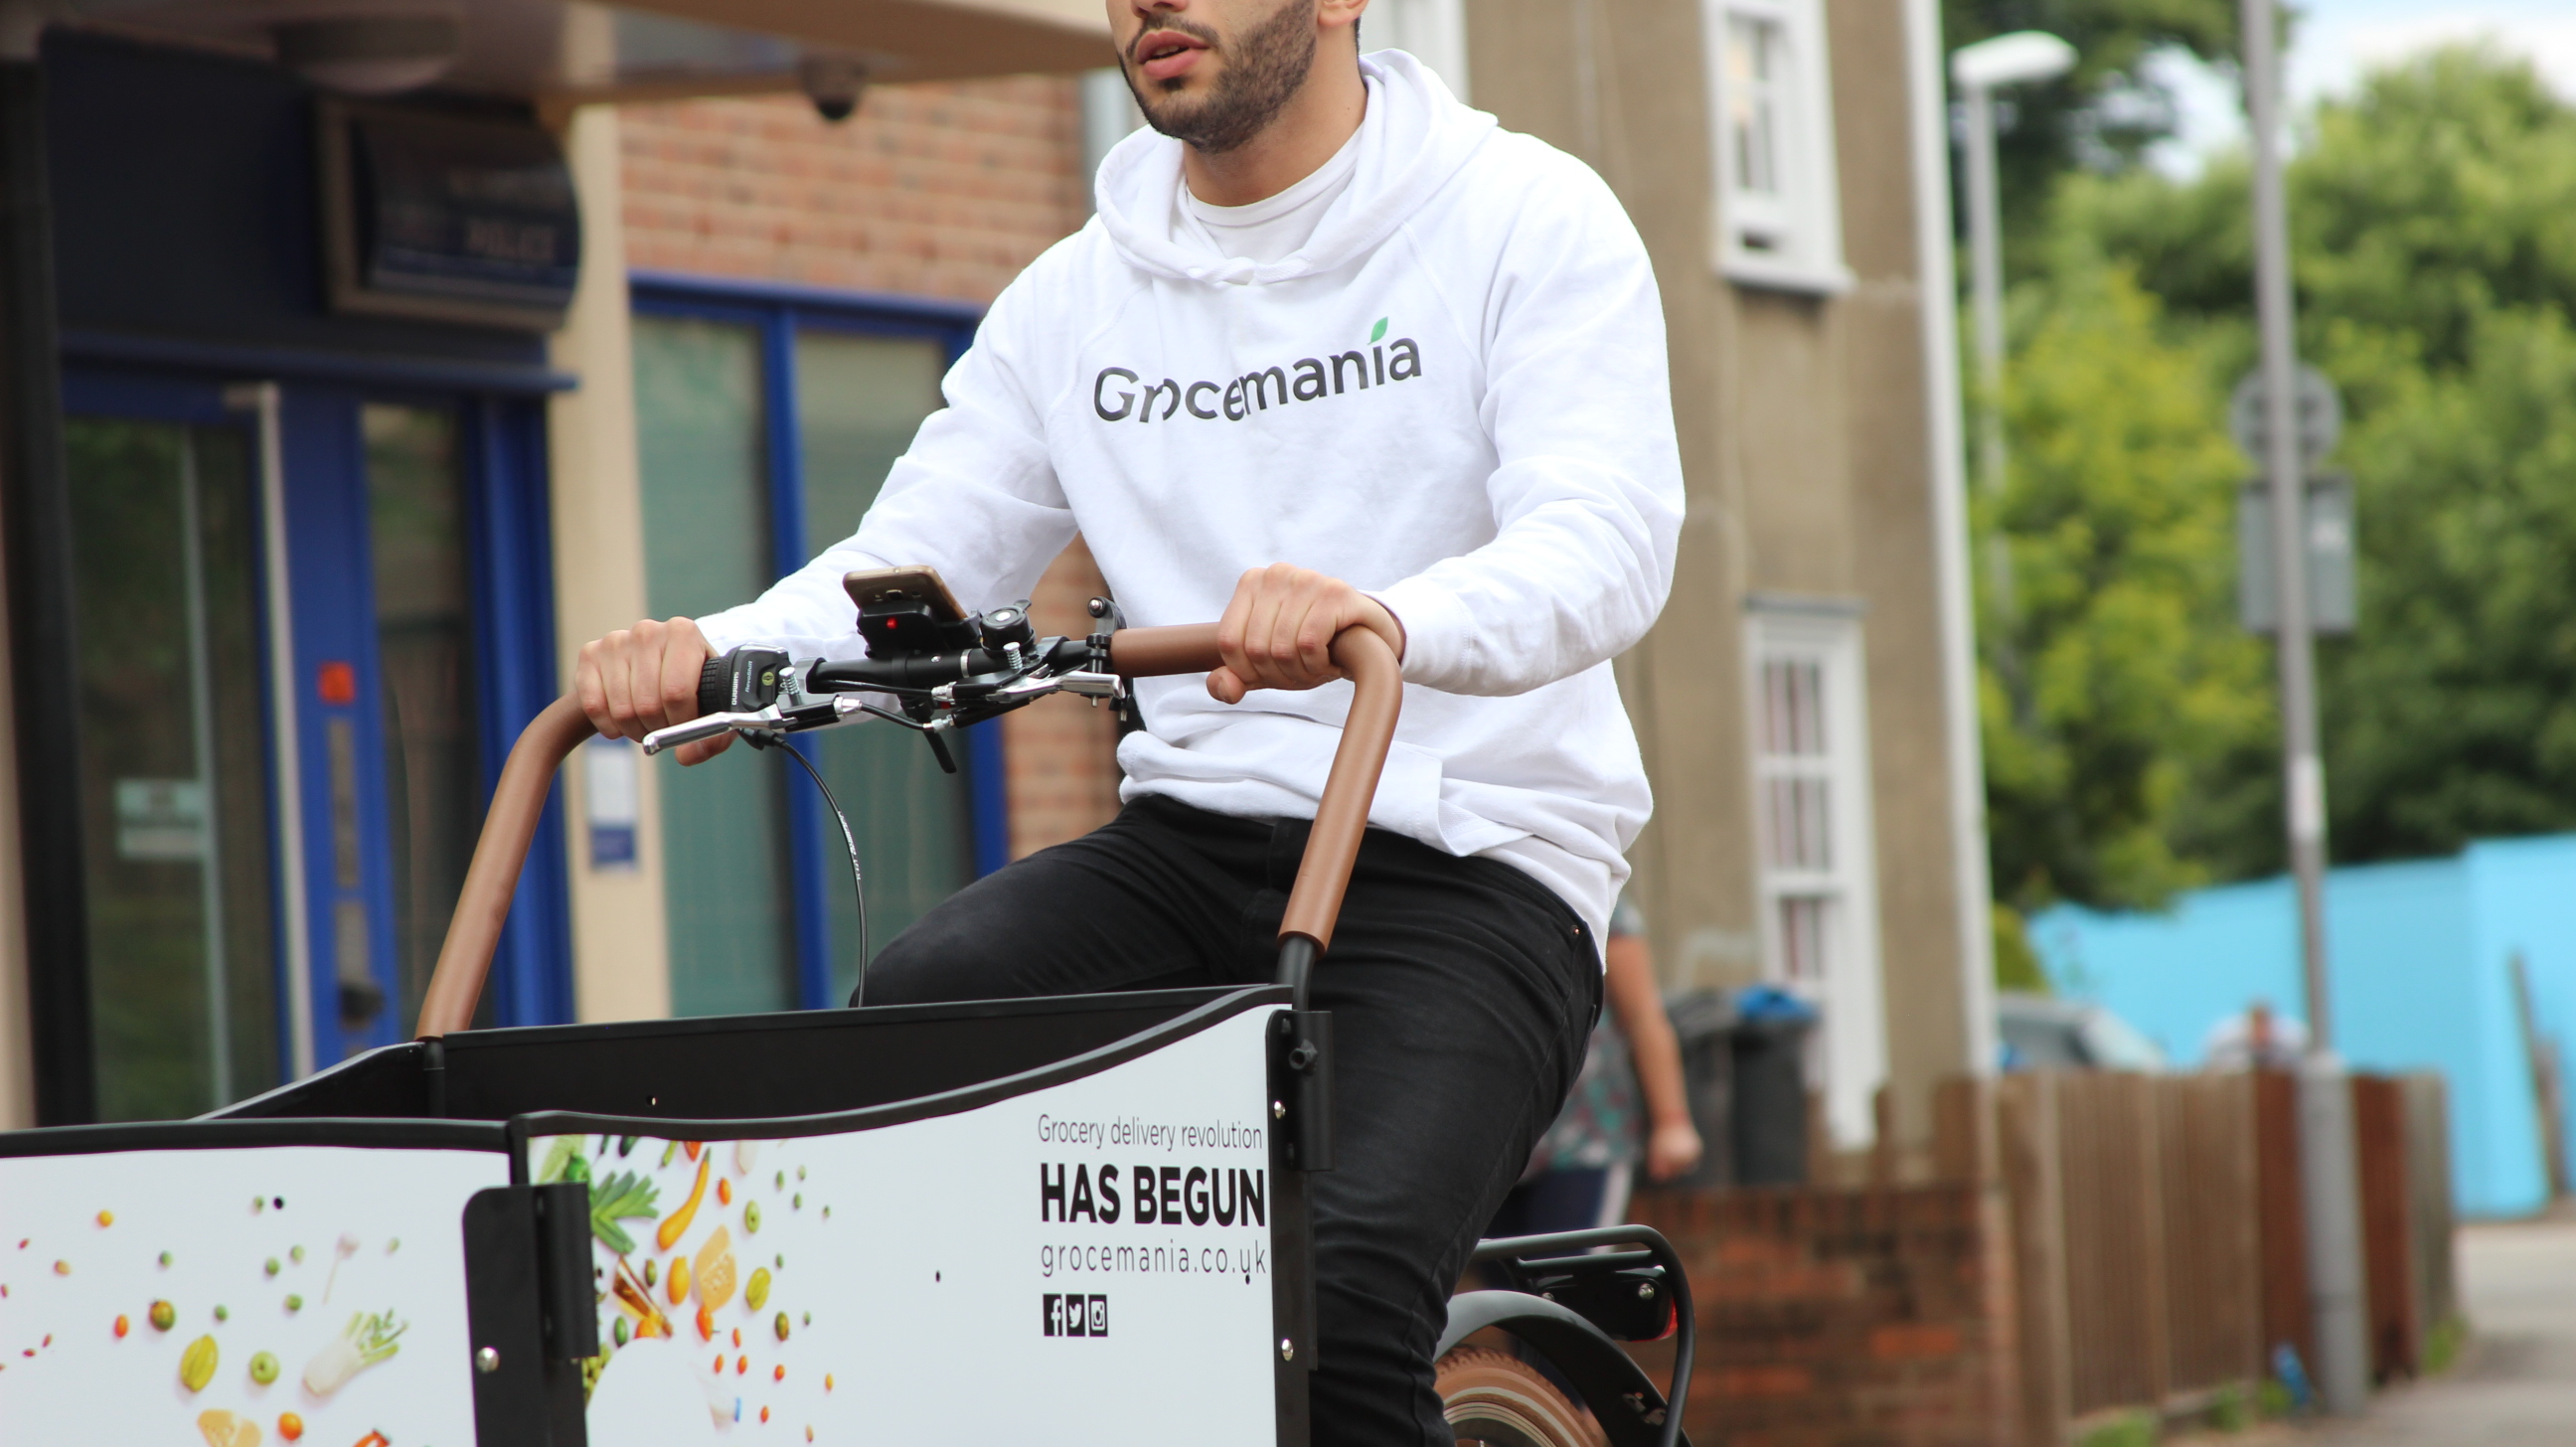 Grocery delivery service Grocemania raises over £170,000